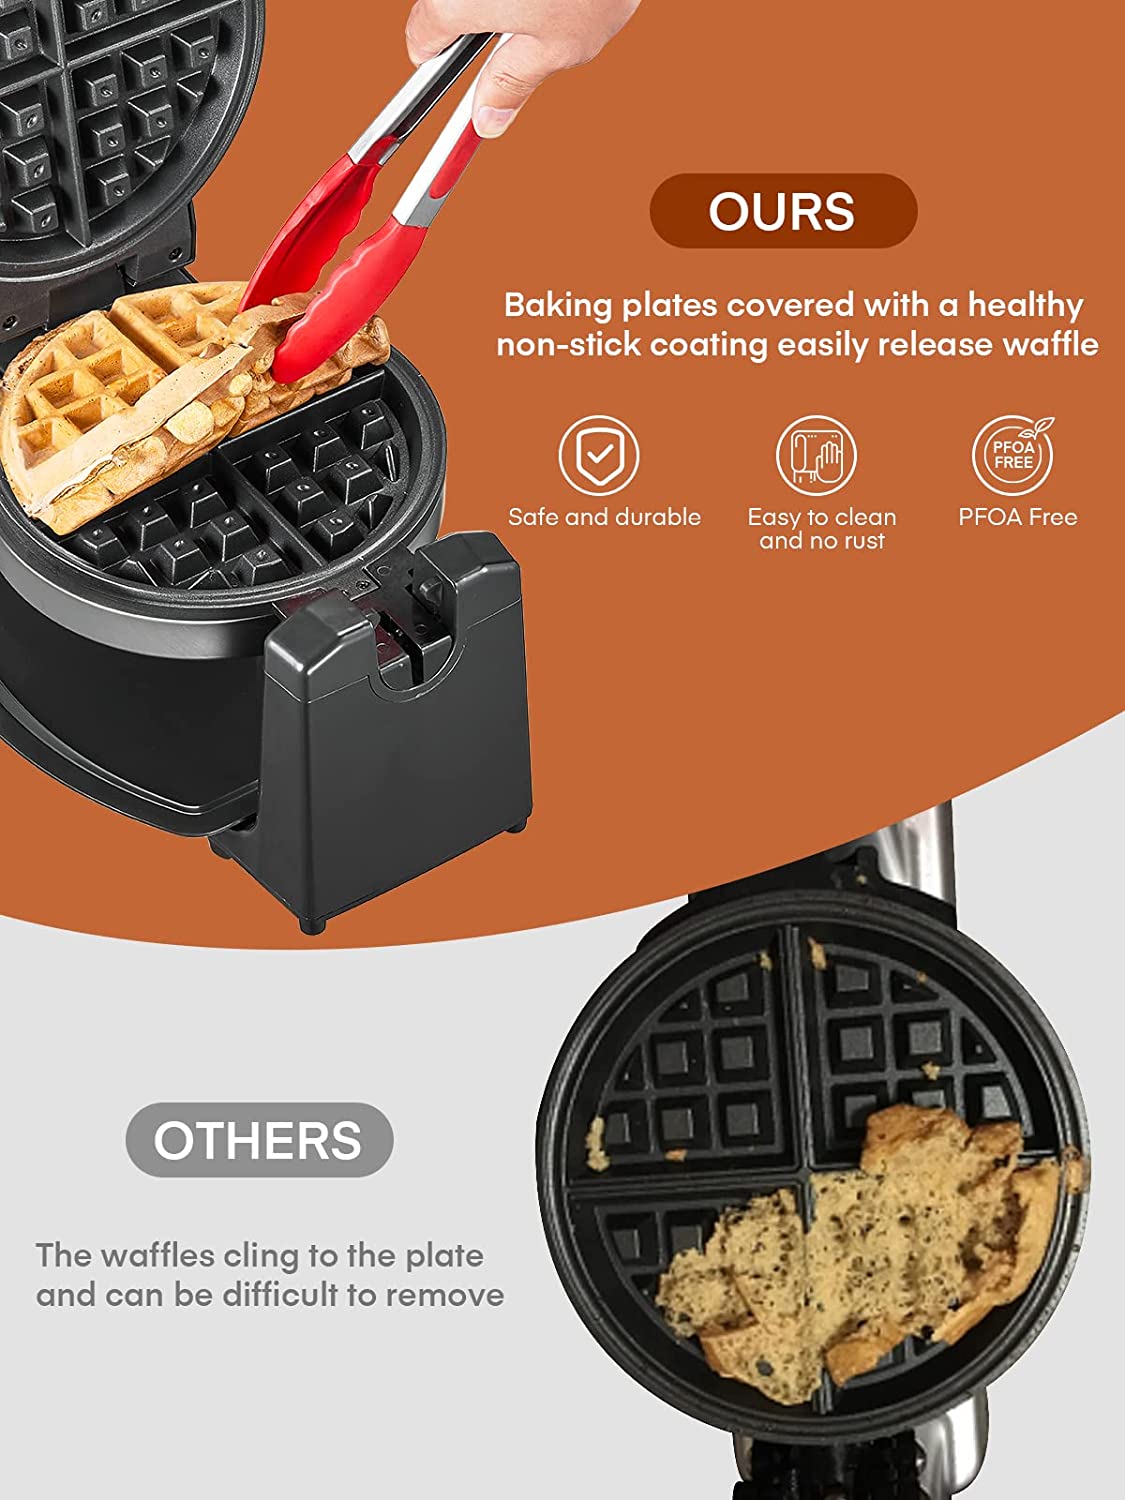 baking plates covered with a healthy non-stick coating easily release waffle, Flip Belgian Waffle Maker, 180° Rotating Waffle Iron with Easy to Clean Non-Stick Surfaces, Classic 1" Thick Waffles, Included Recipe, Removable Drip Tray, Browning Control, 1100W, Stainless Steel